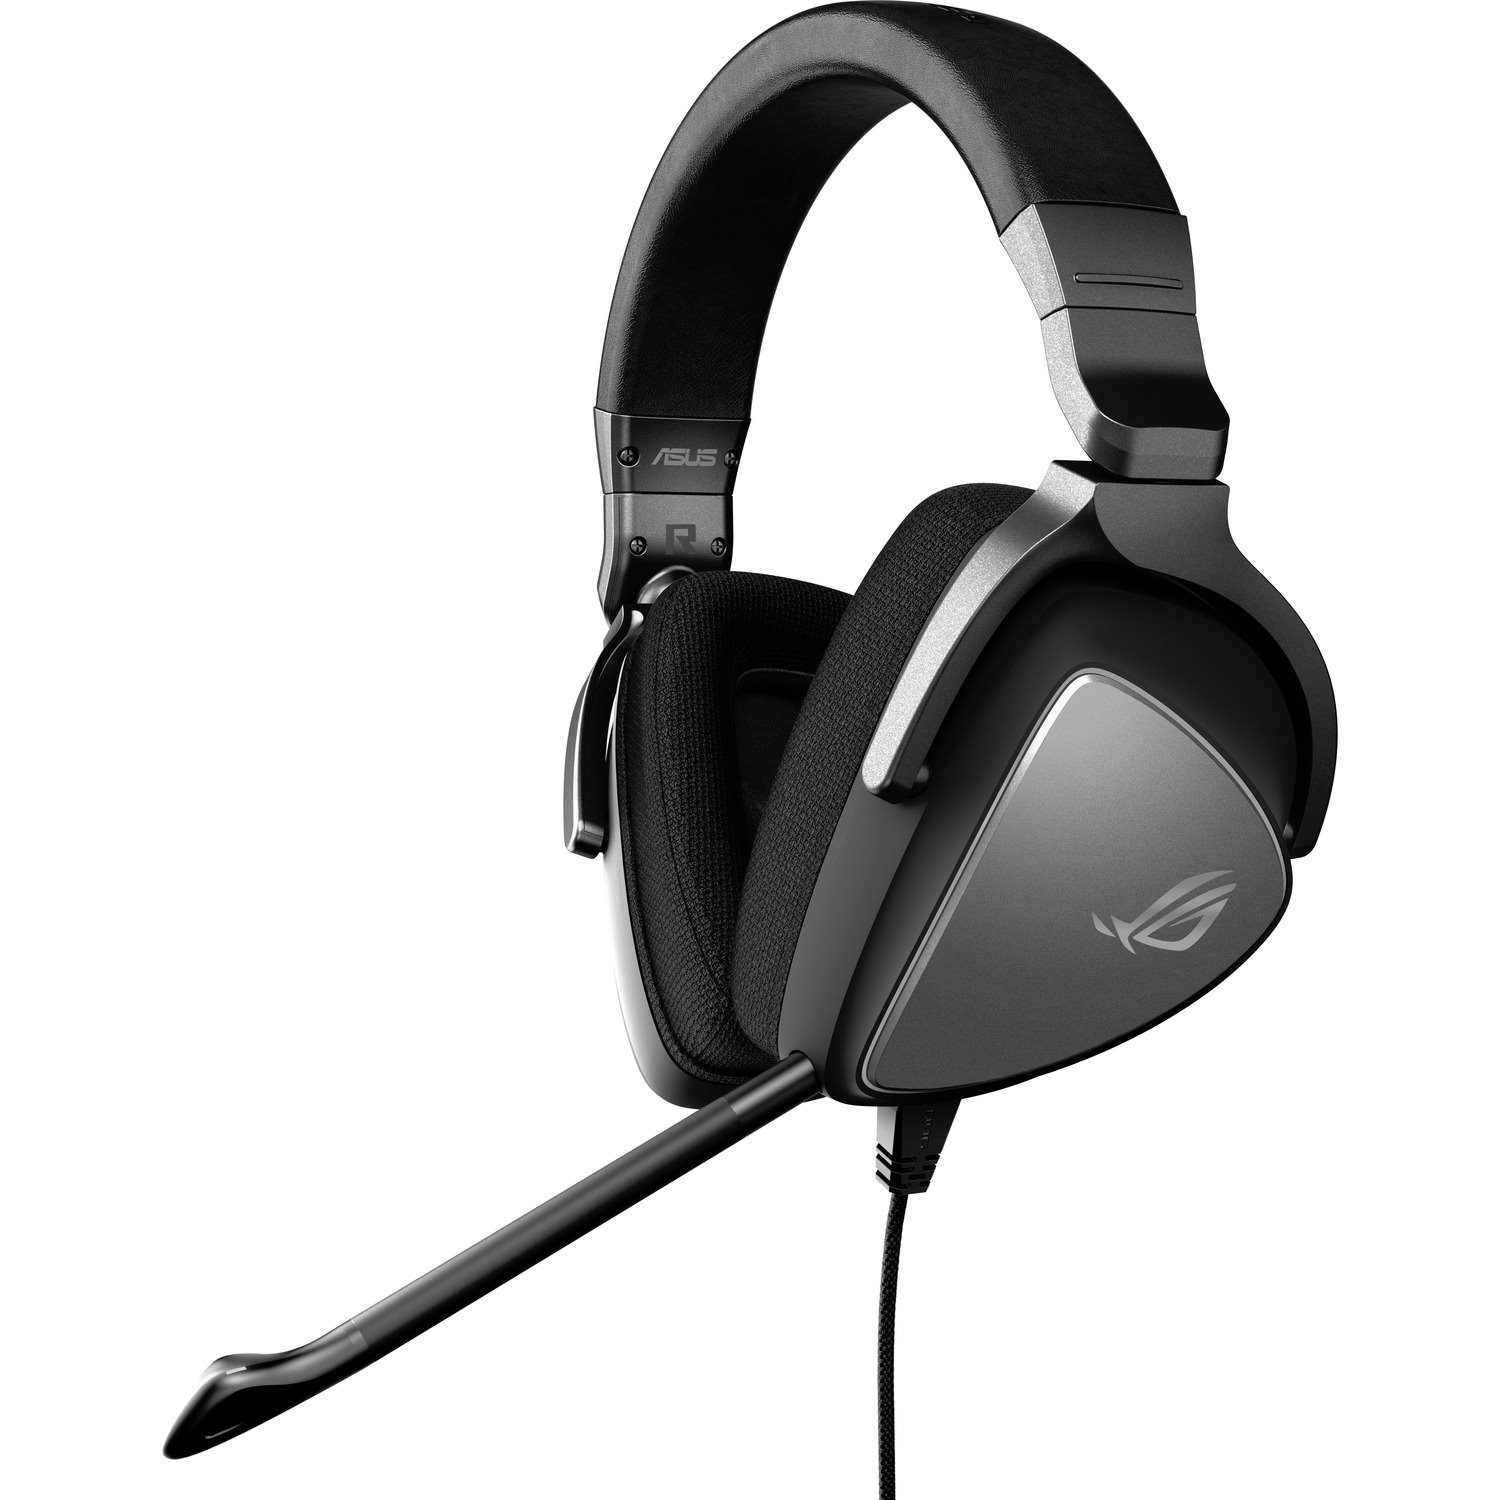 Asus ROG Delta Core Wired Over-the-head Stereo Gaming Headset - Black